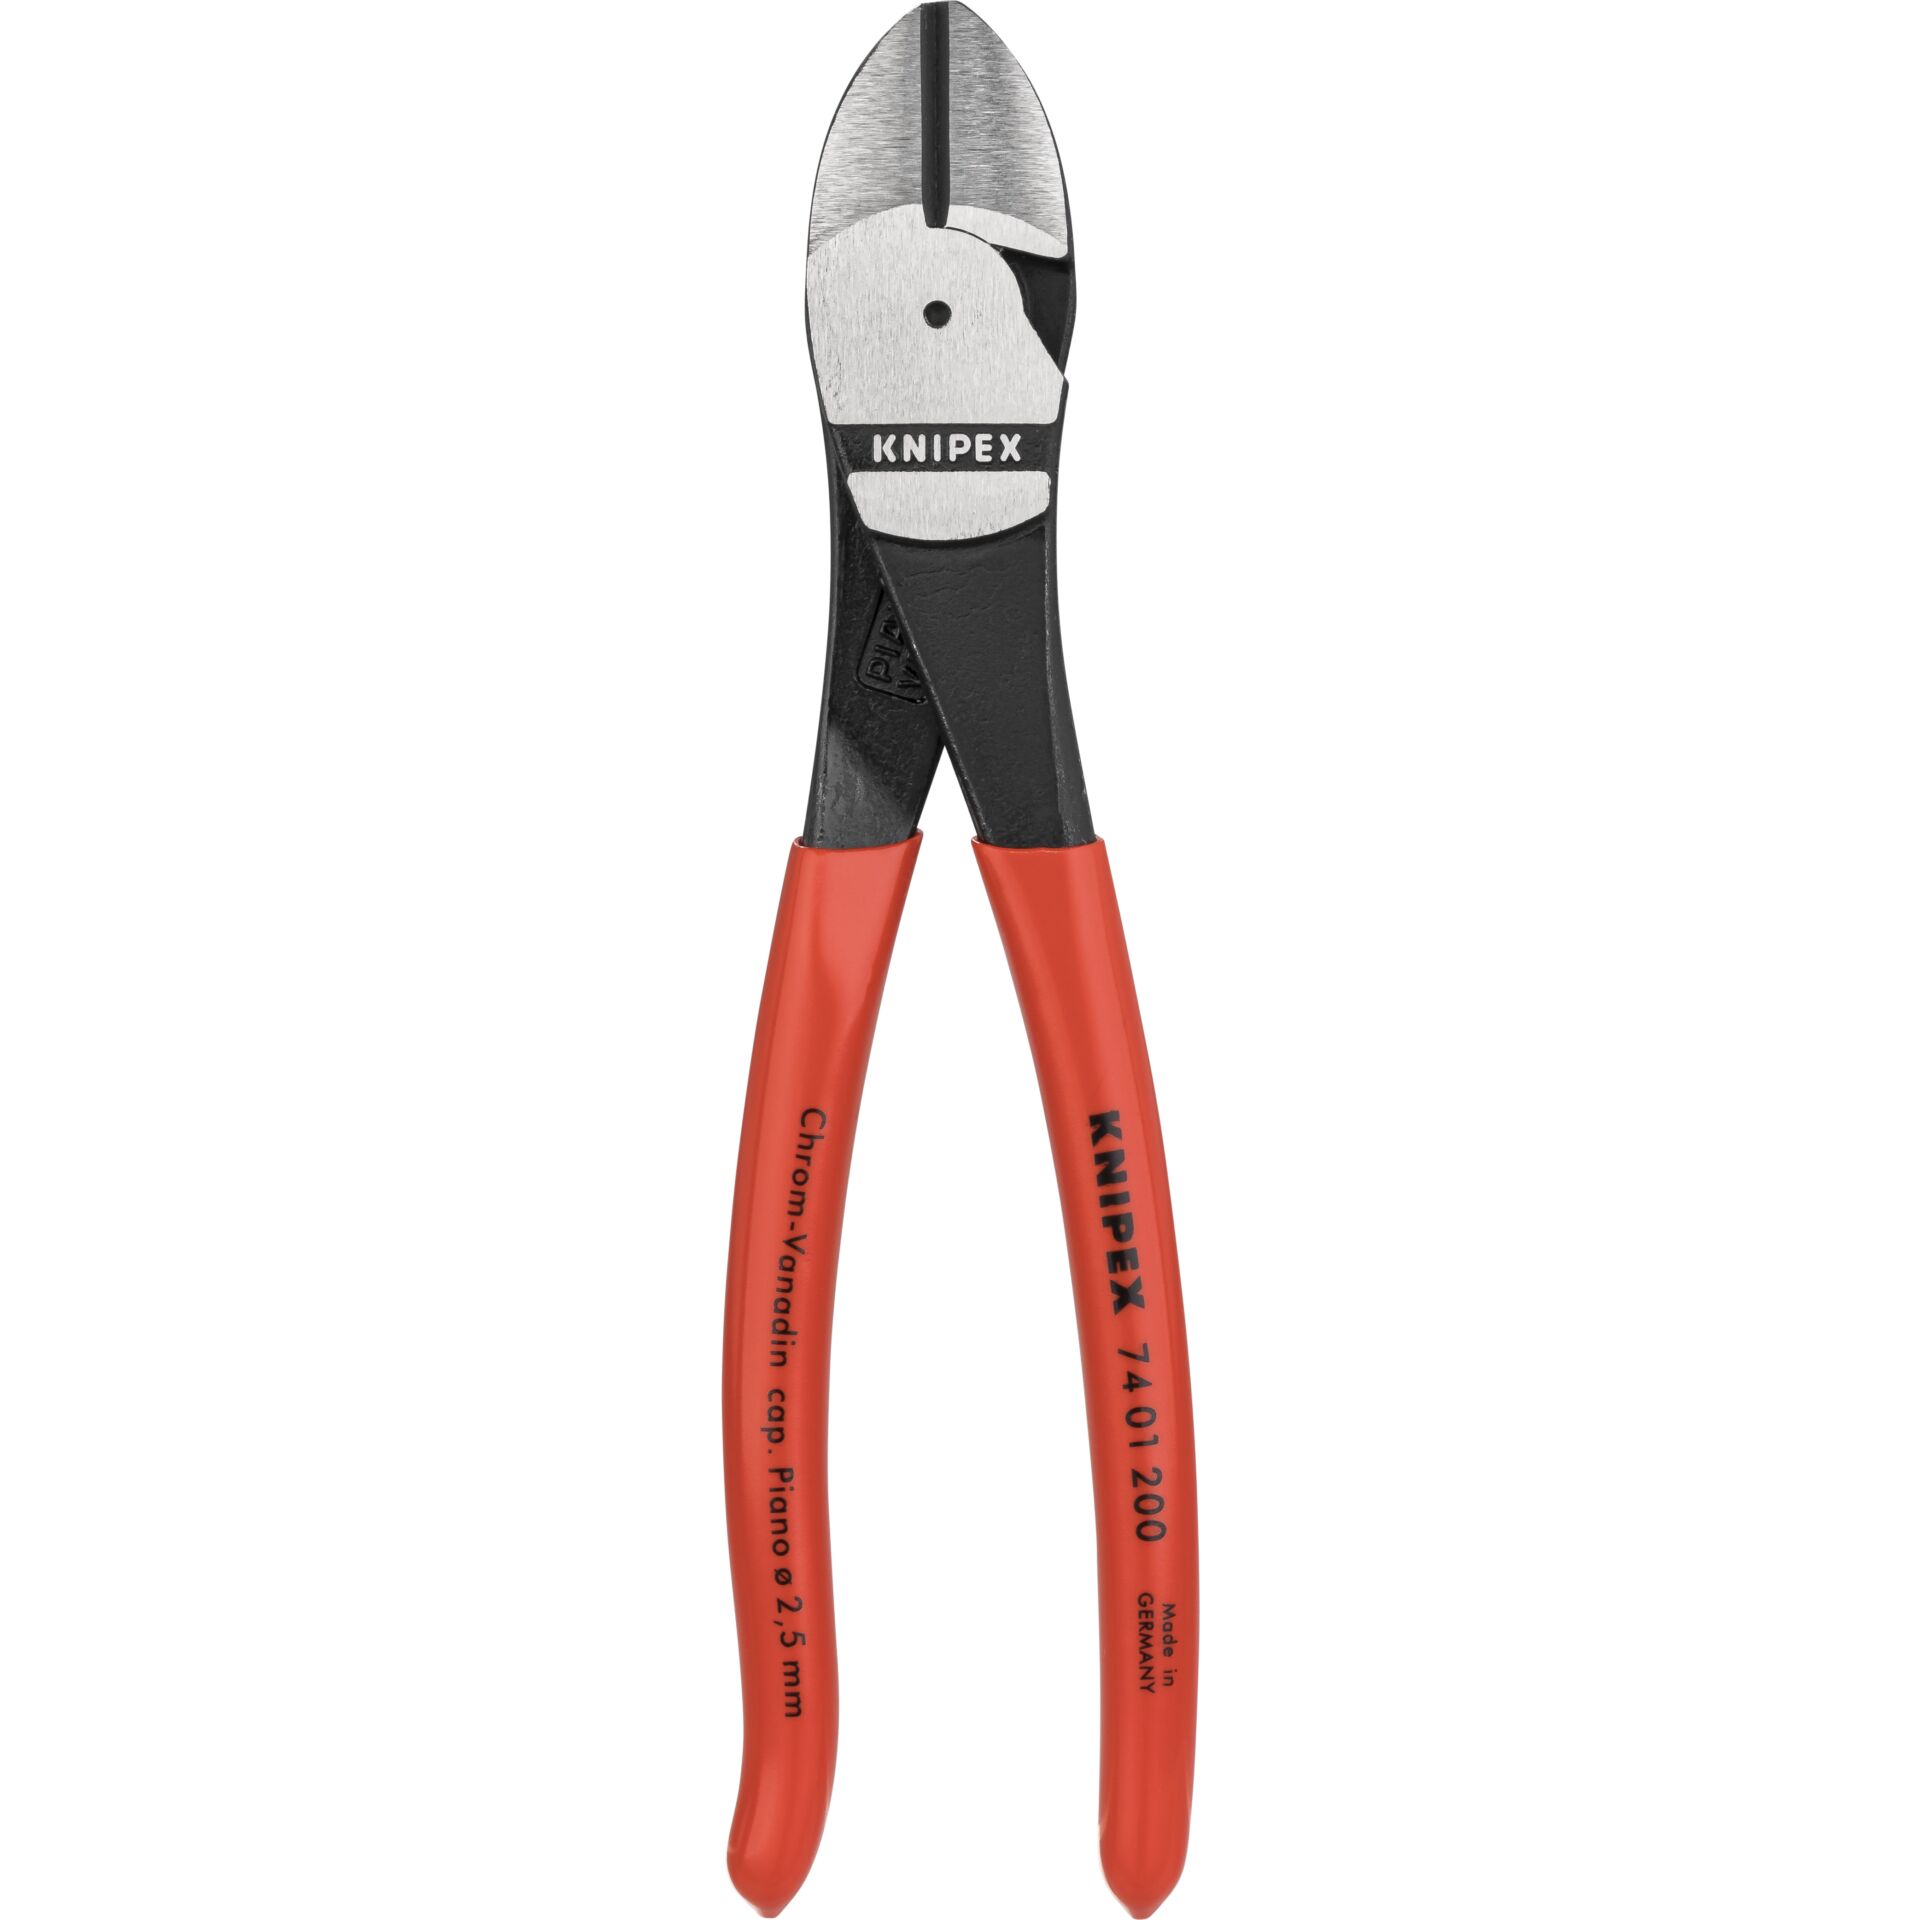 KNIPEX Kraft tronchese laterale